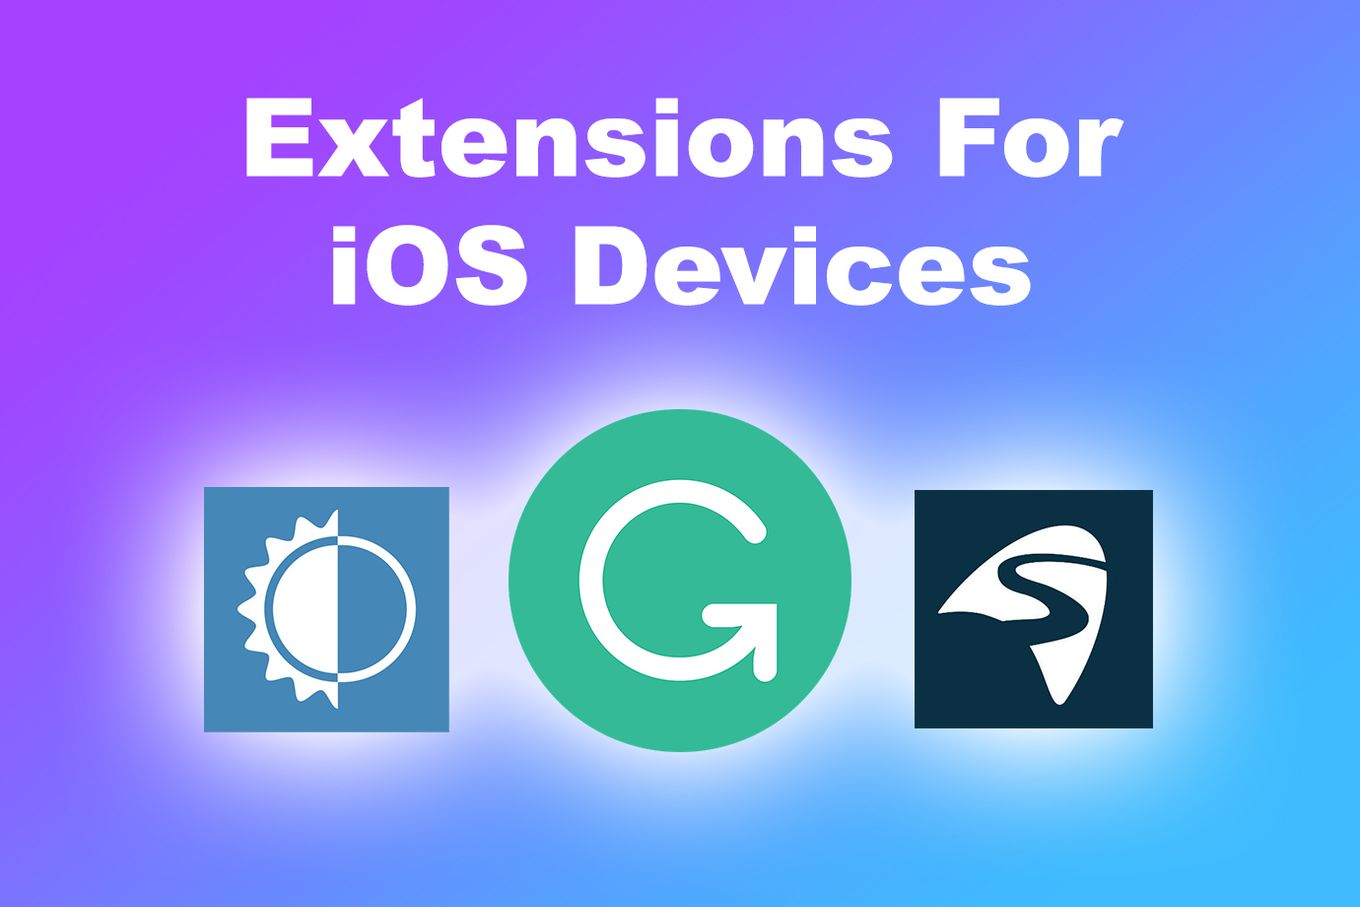 Extensions For iOS Devices